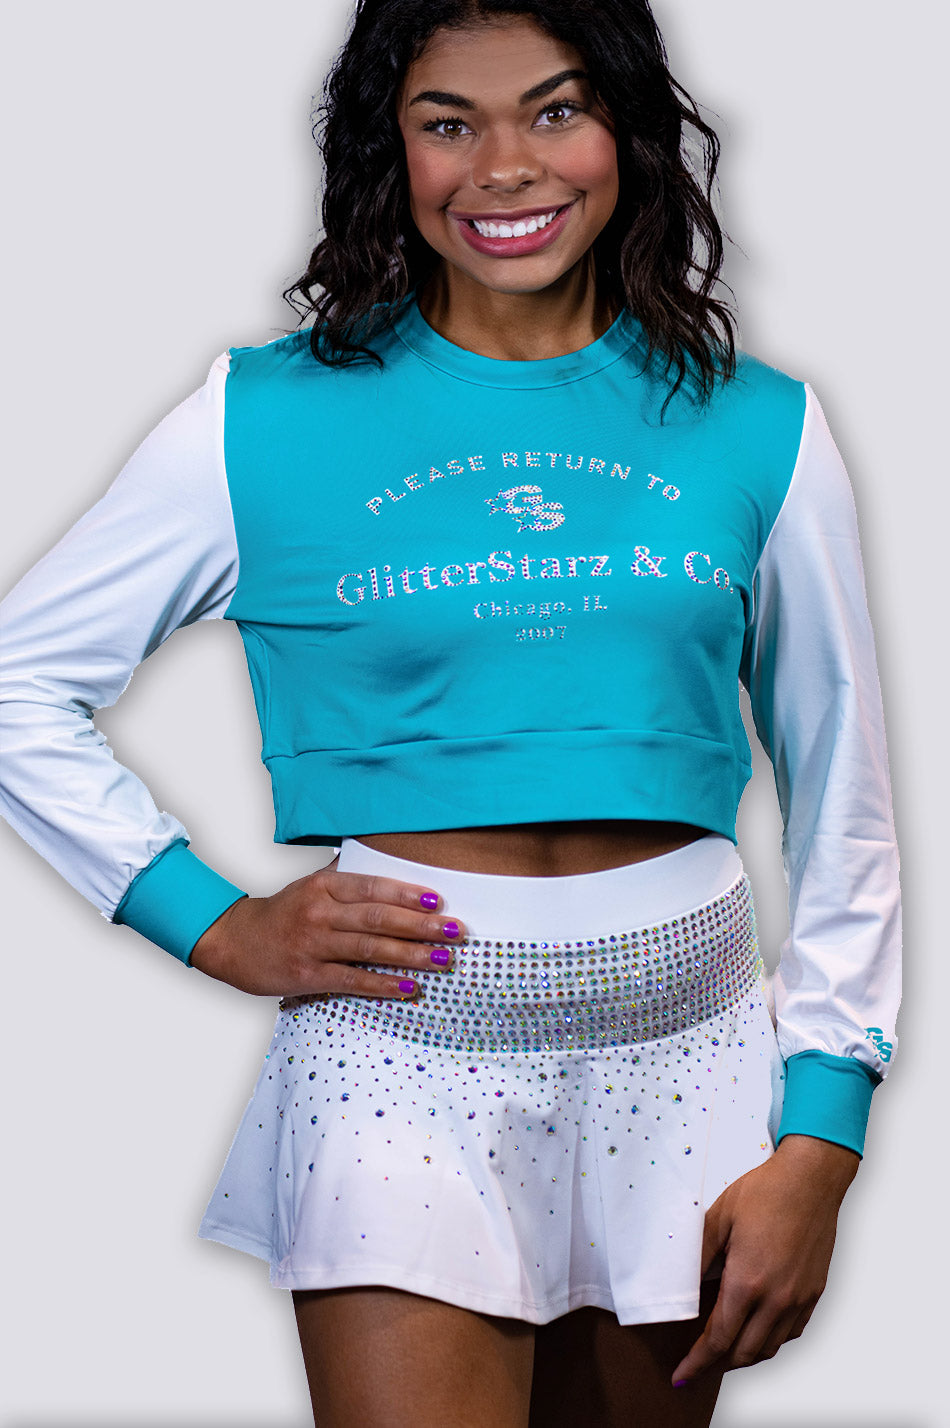 Crop Teal and White Sweatshirt "Return to GS" - T9